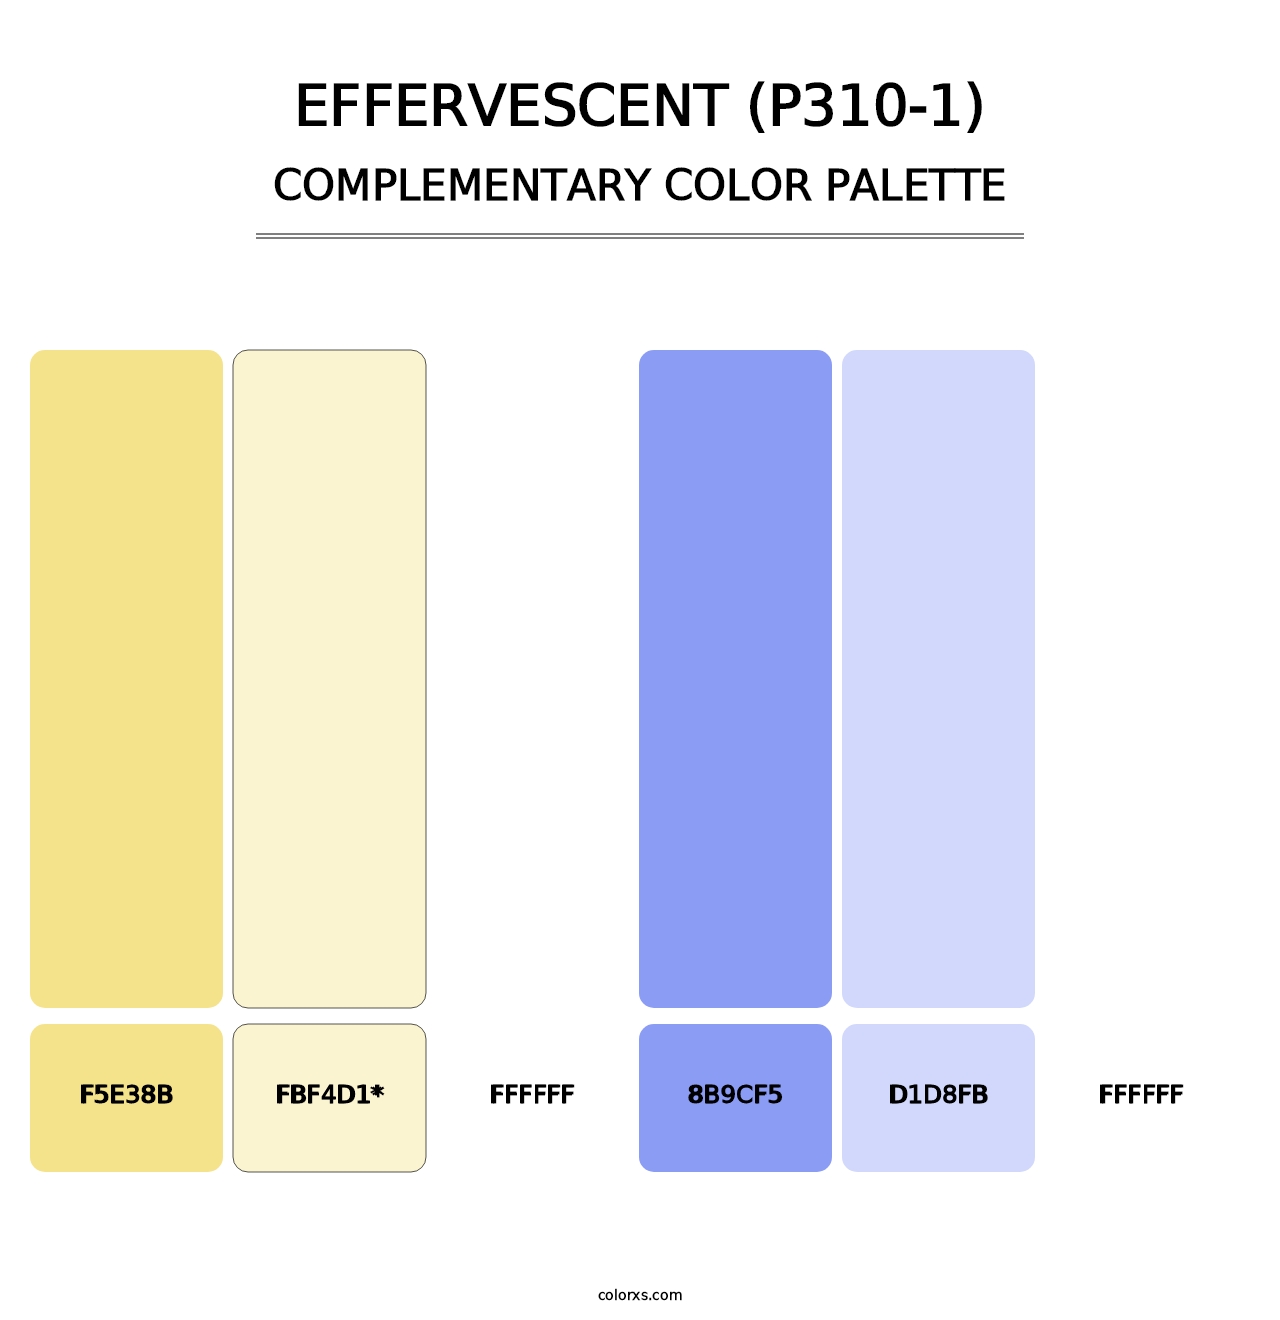 Effervescent (P310-1) - Complementary Color Palette